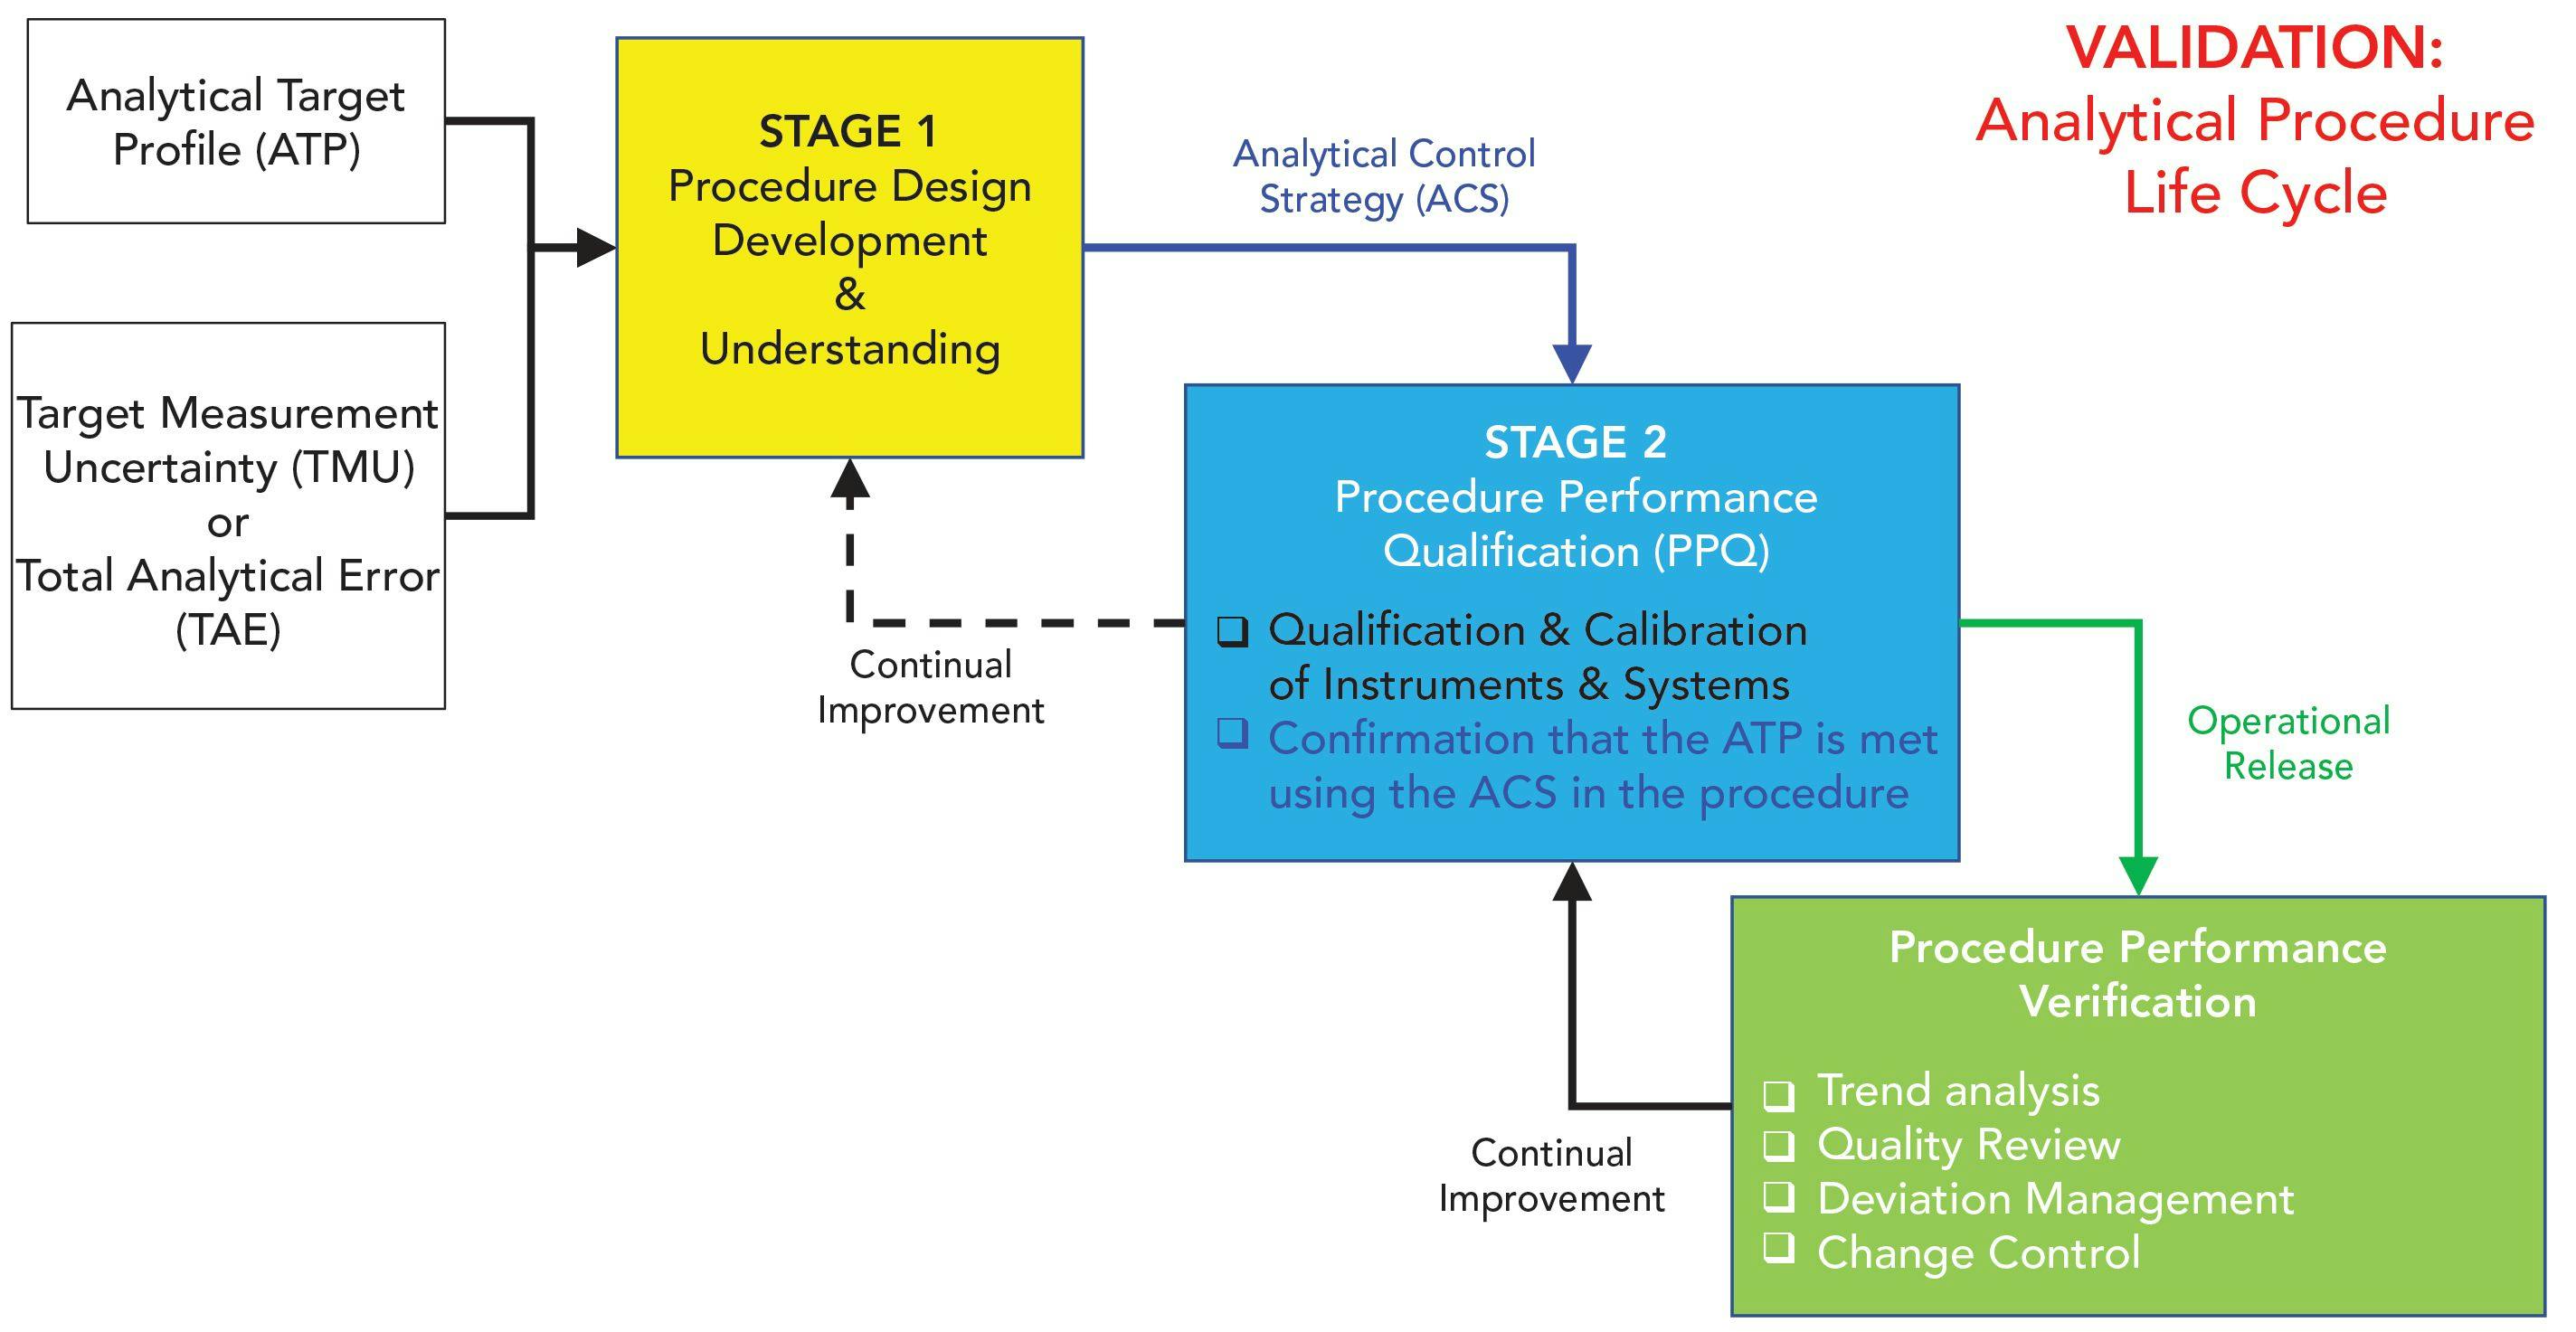 Are You Ready for a Life Cycle Approach for Analytical Instruments and Systems?